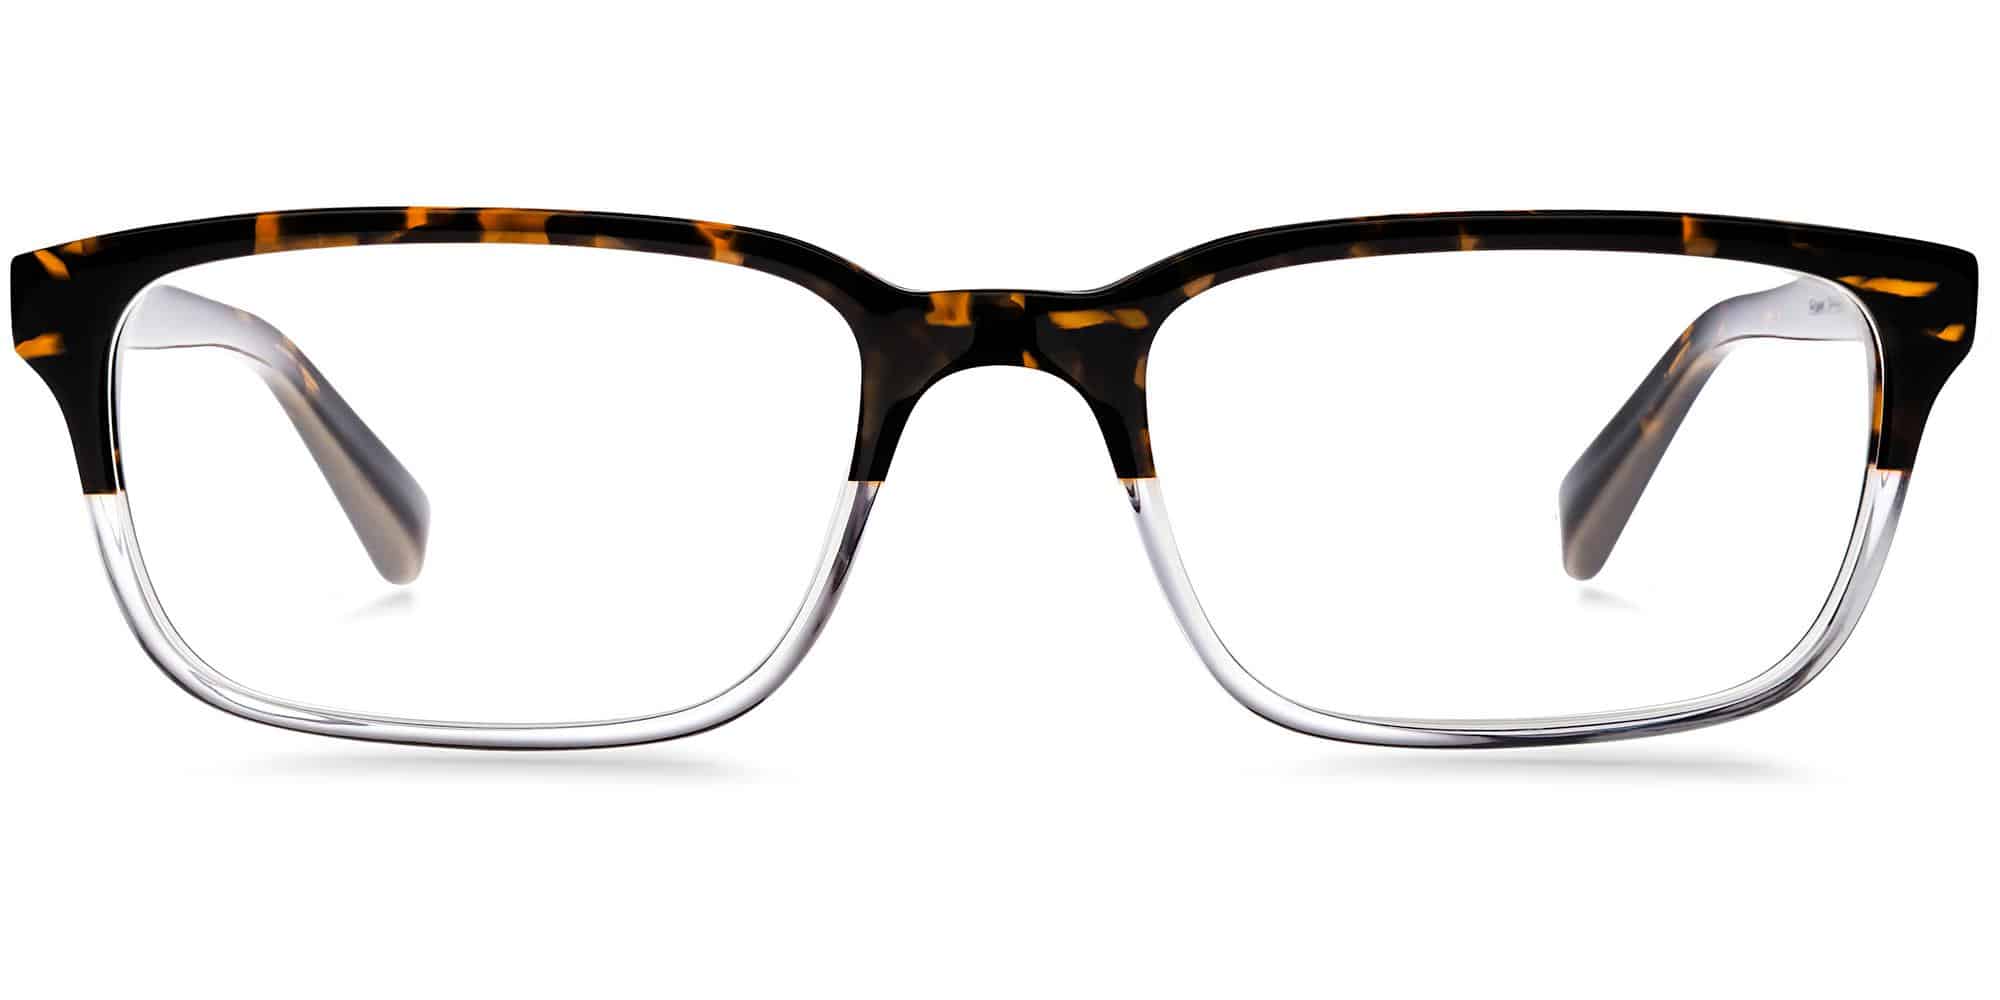 Front View Image of Seymour Eyeglasses Collection, by Warby Parker Brand, in Tennessee Whiskey Color